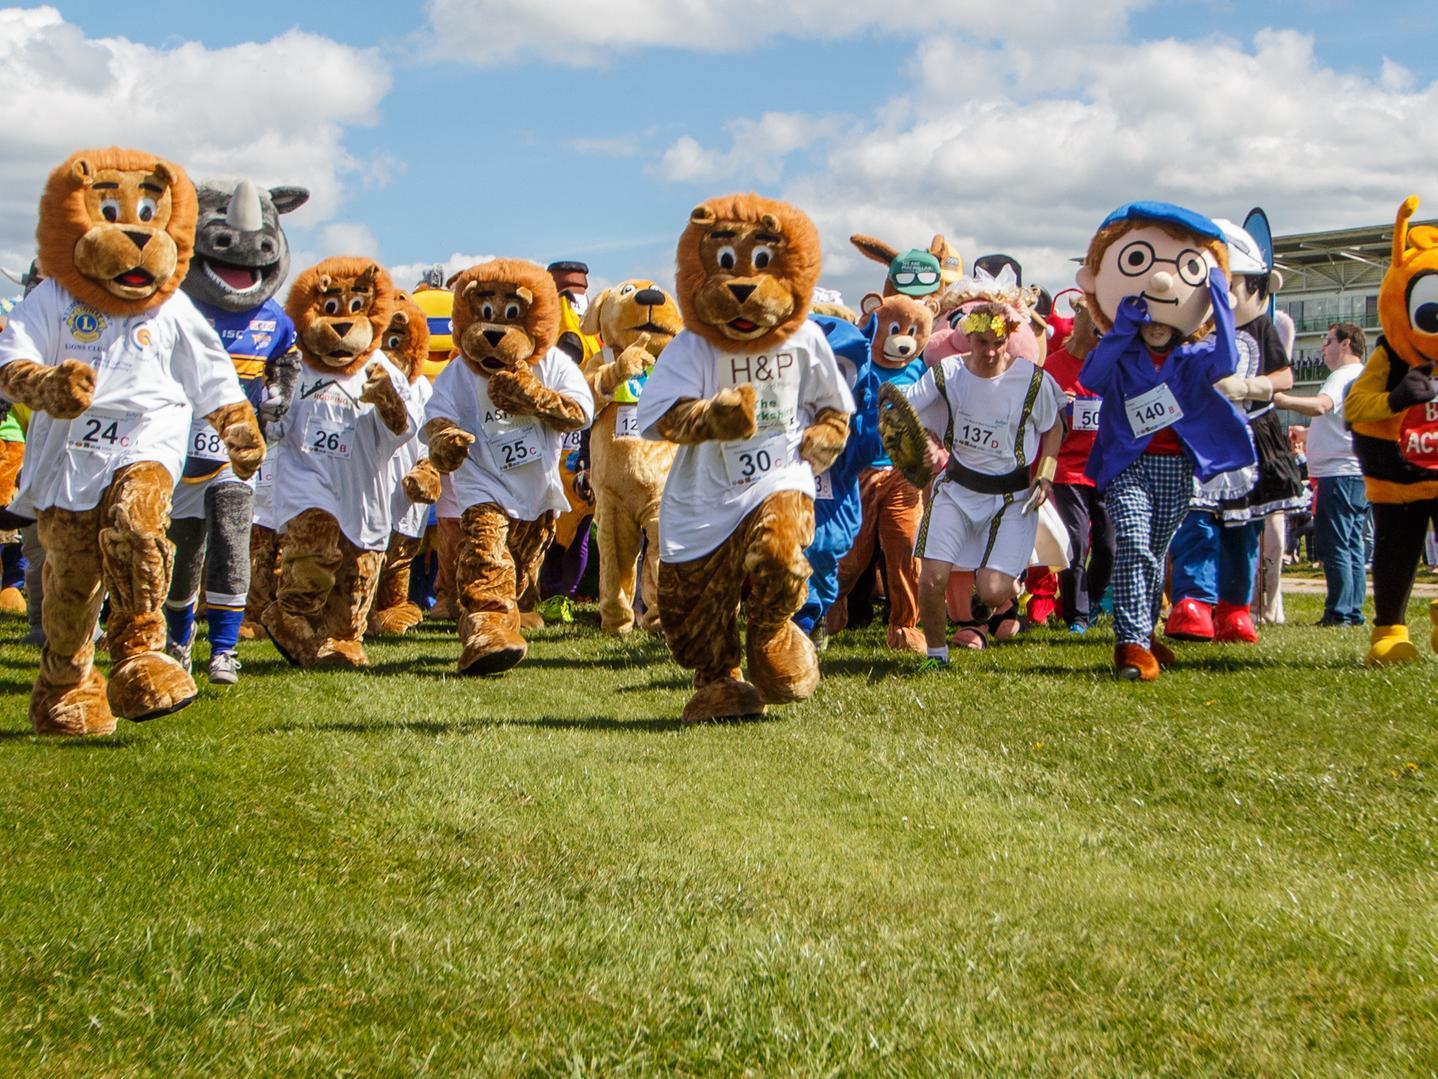 The largest mascot race was completed by 125 participants, at an event organised by The Sue Ryder Manorlands Hospice (UK) at Wetherby Racecourse, in West Yorkshire, UK, on 26 April 2015.